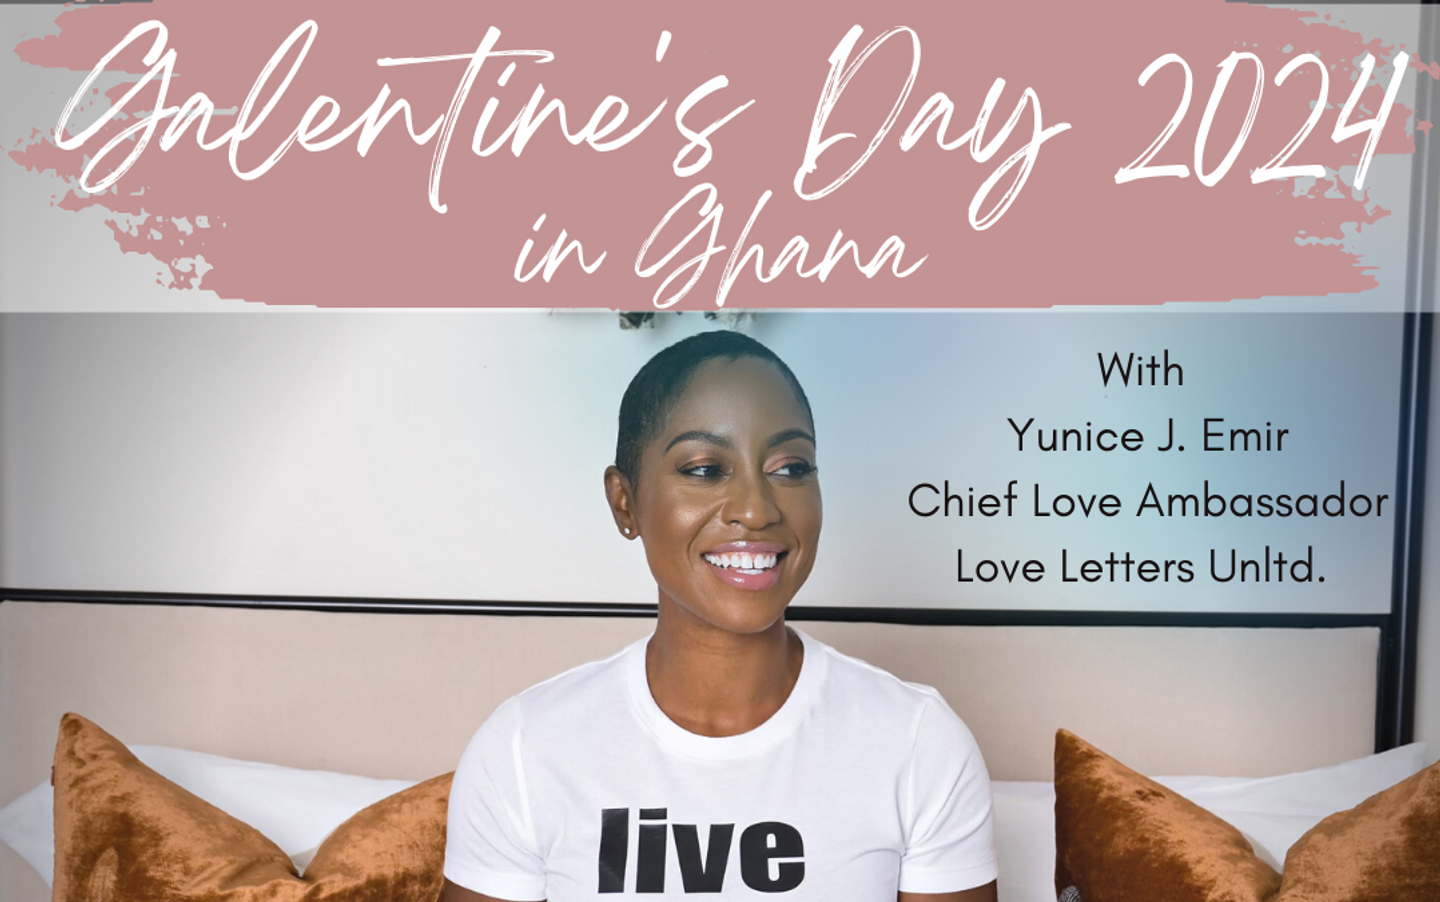 The Ultimate Galentine's Day Experience in Ghana with YJE!